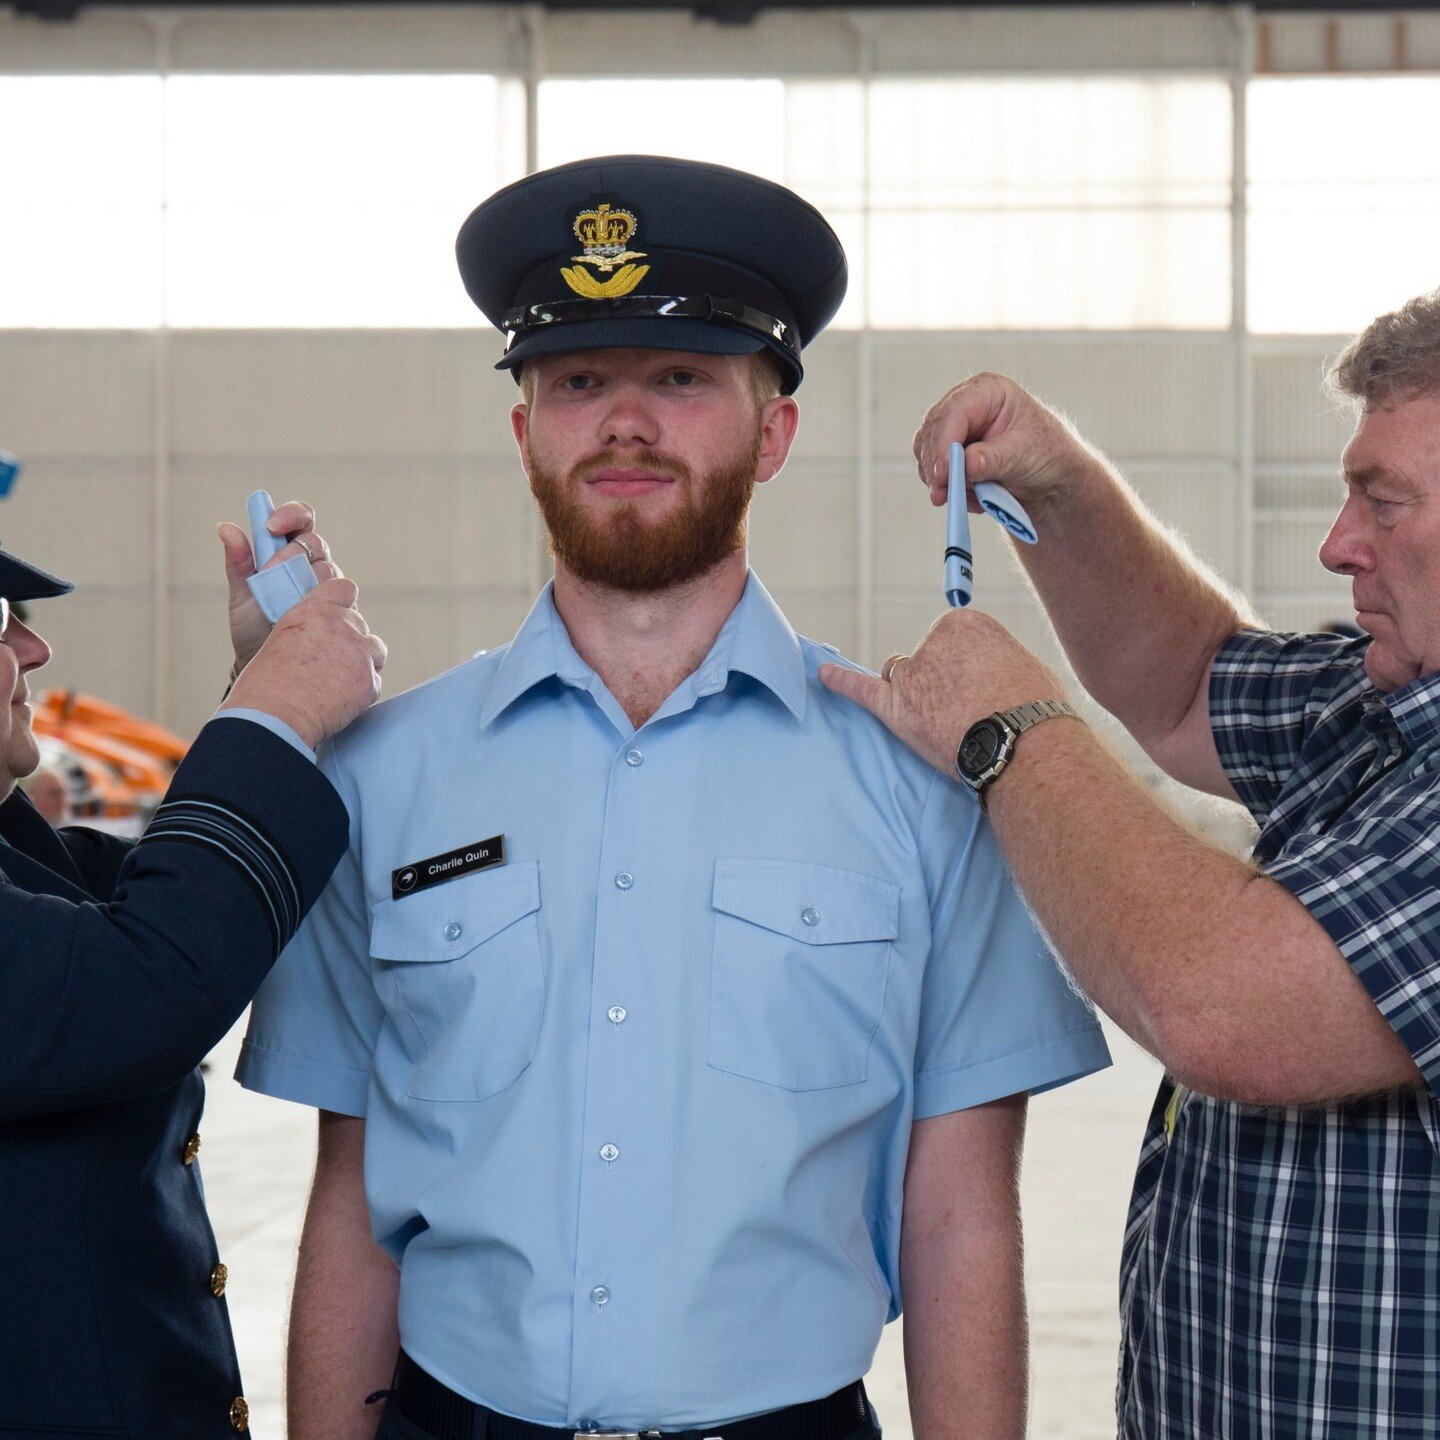 Congratulations to our newest member of the officer team - A/PLTOFF Charles Quin. 
A/PLTOFF Quin successfully completed the nine day Commissioning Course held at RNZAF Base Ohakea last week. He was in good company with A/PLTOFF Parulkar attending as 